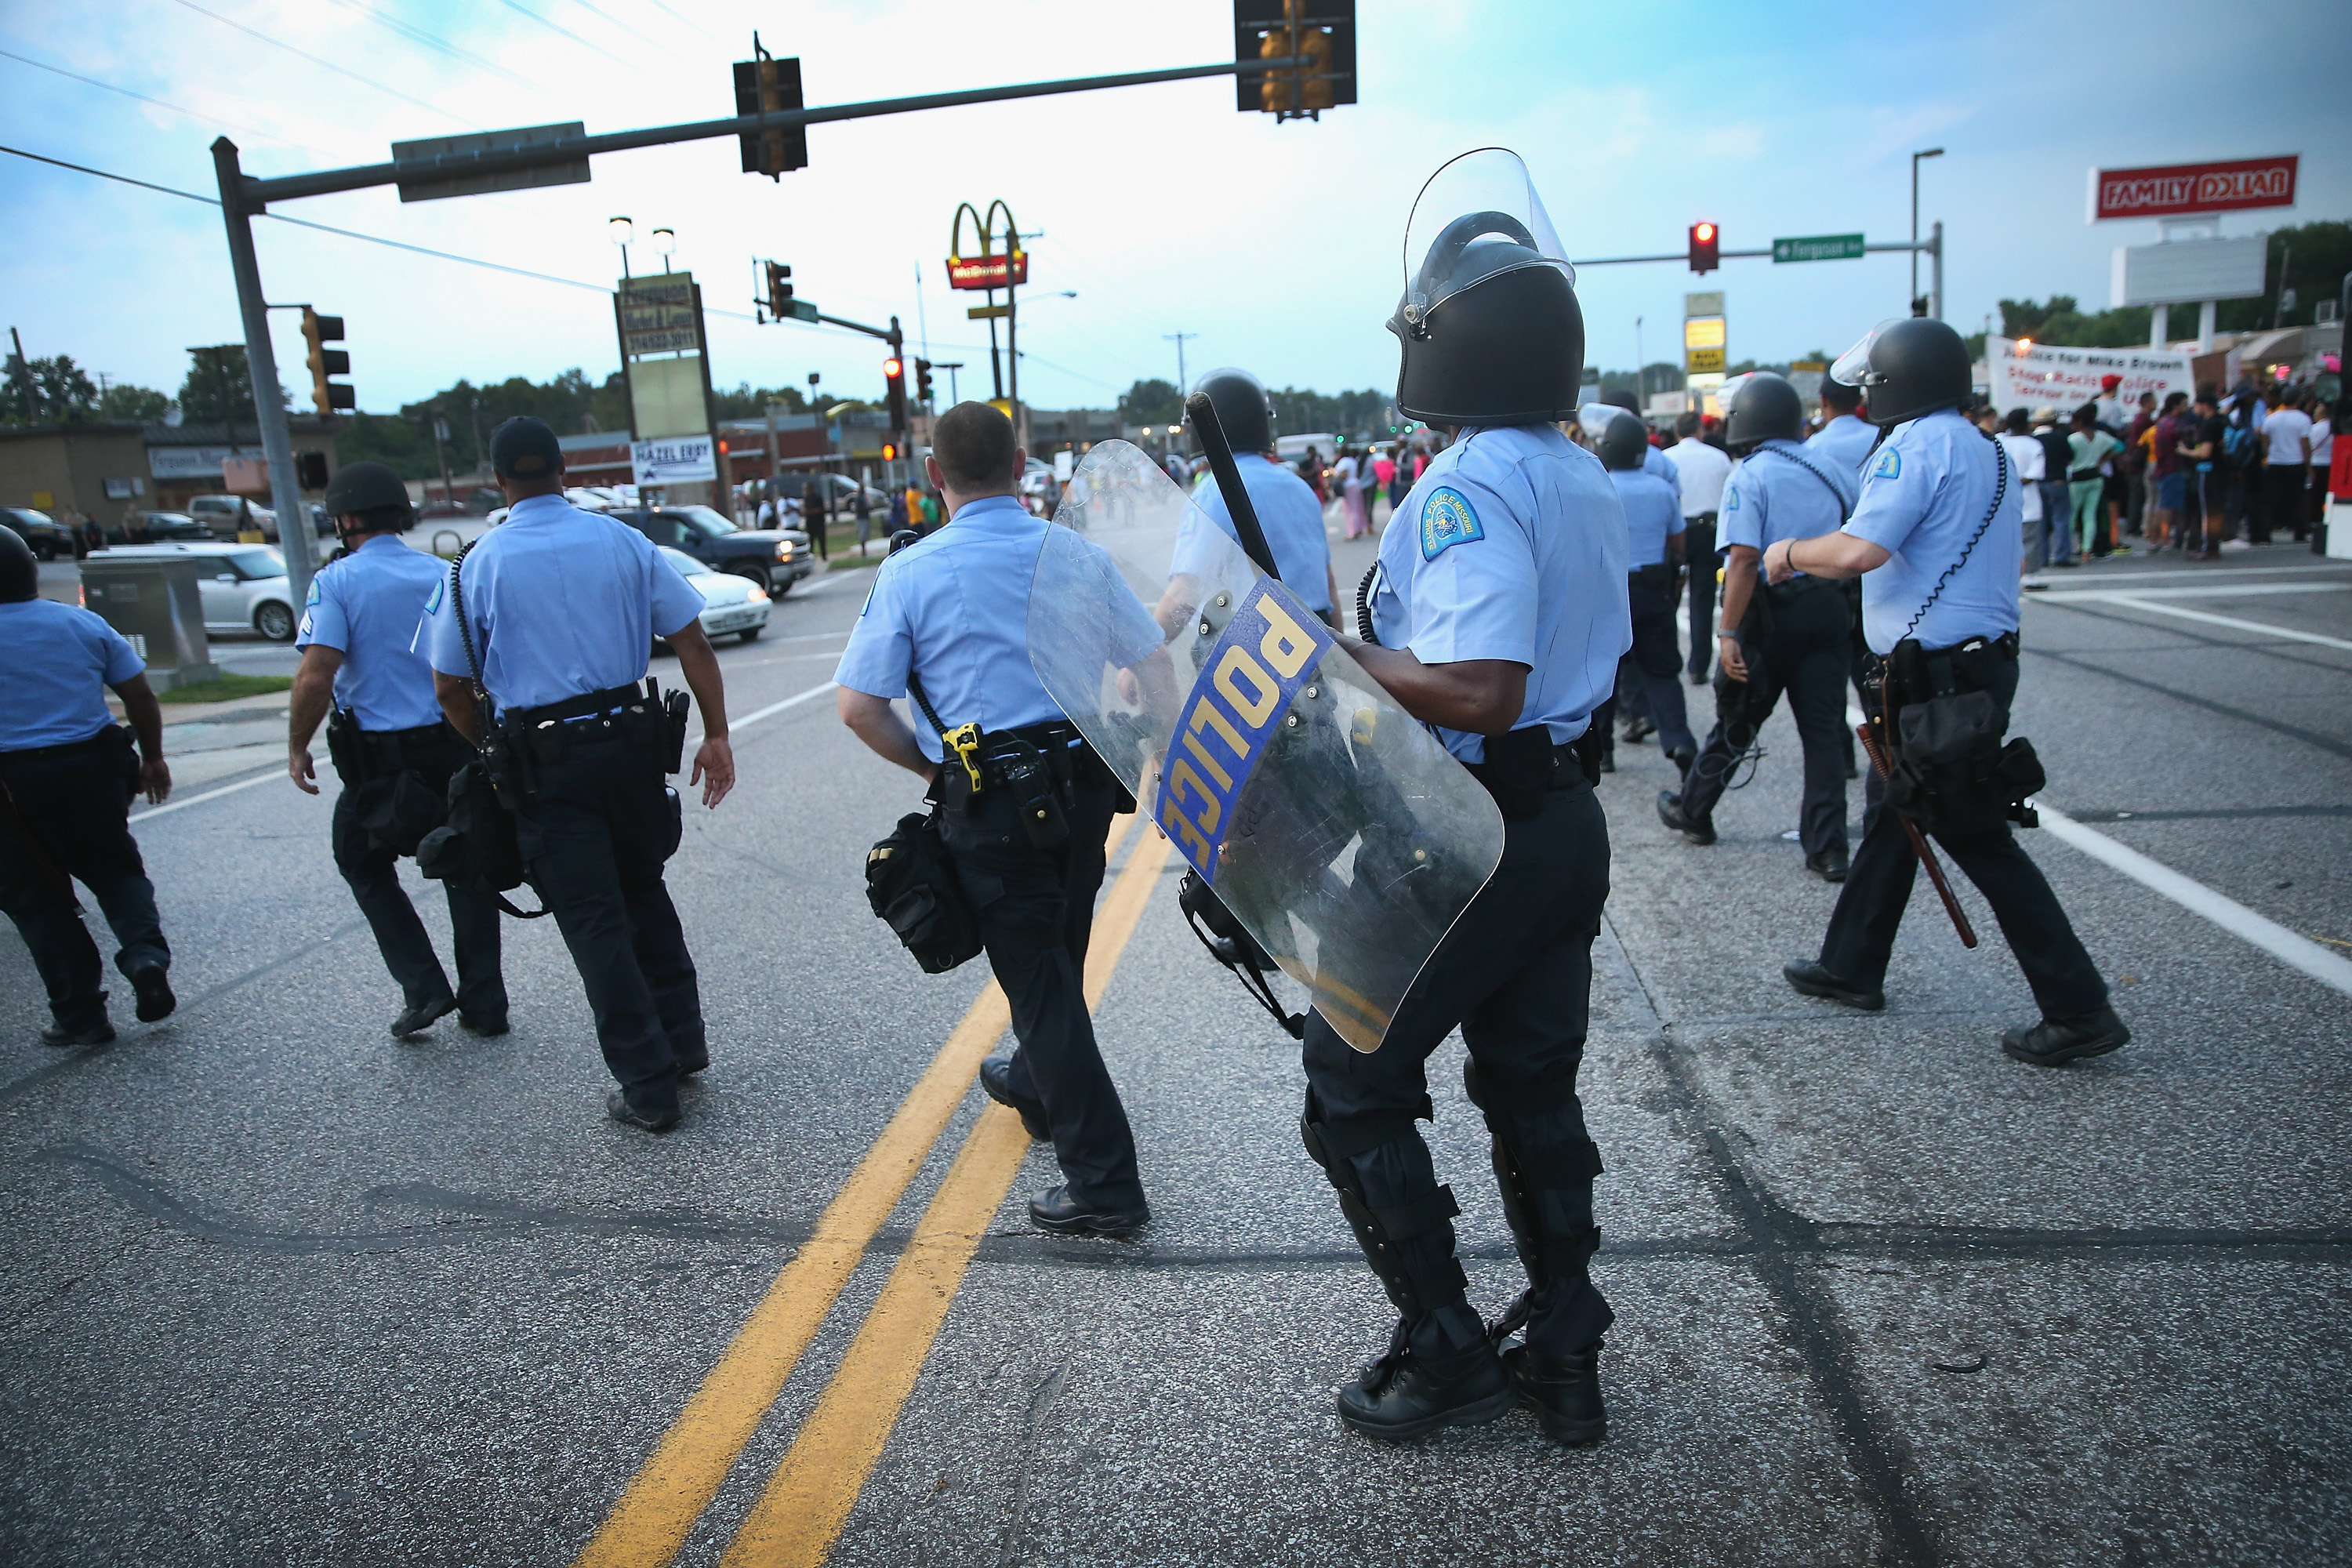 Police are deployed to keep peace along Florissant Avenue on Aug. 16, 2014 in Ferguson, Missouri. (Scott Olson—Getty Images)